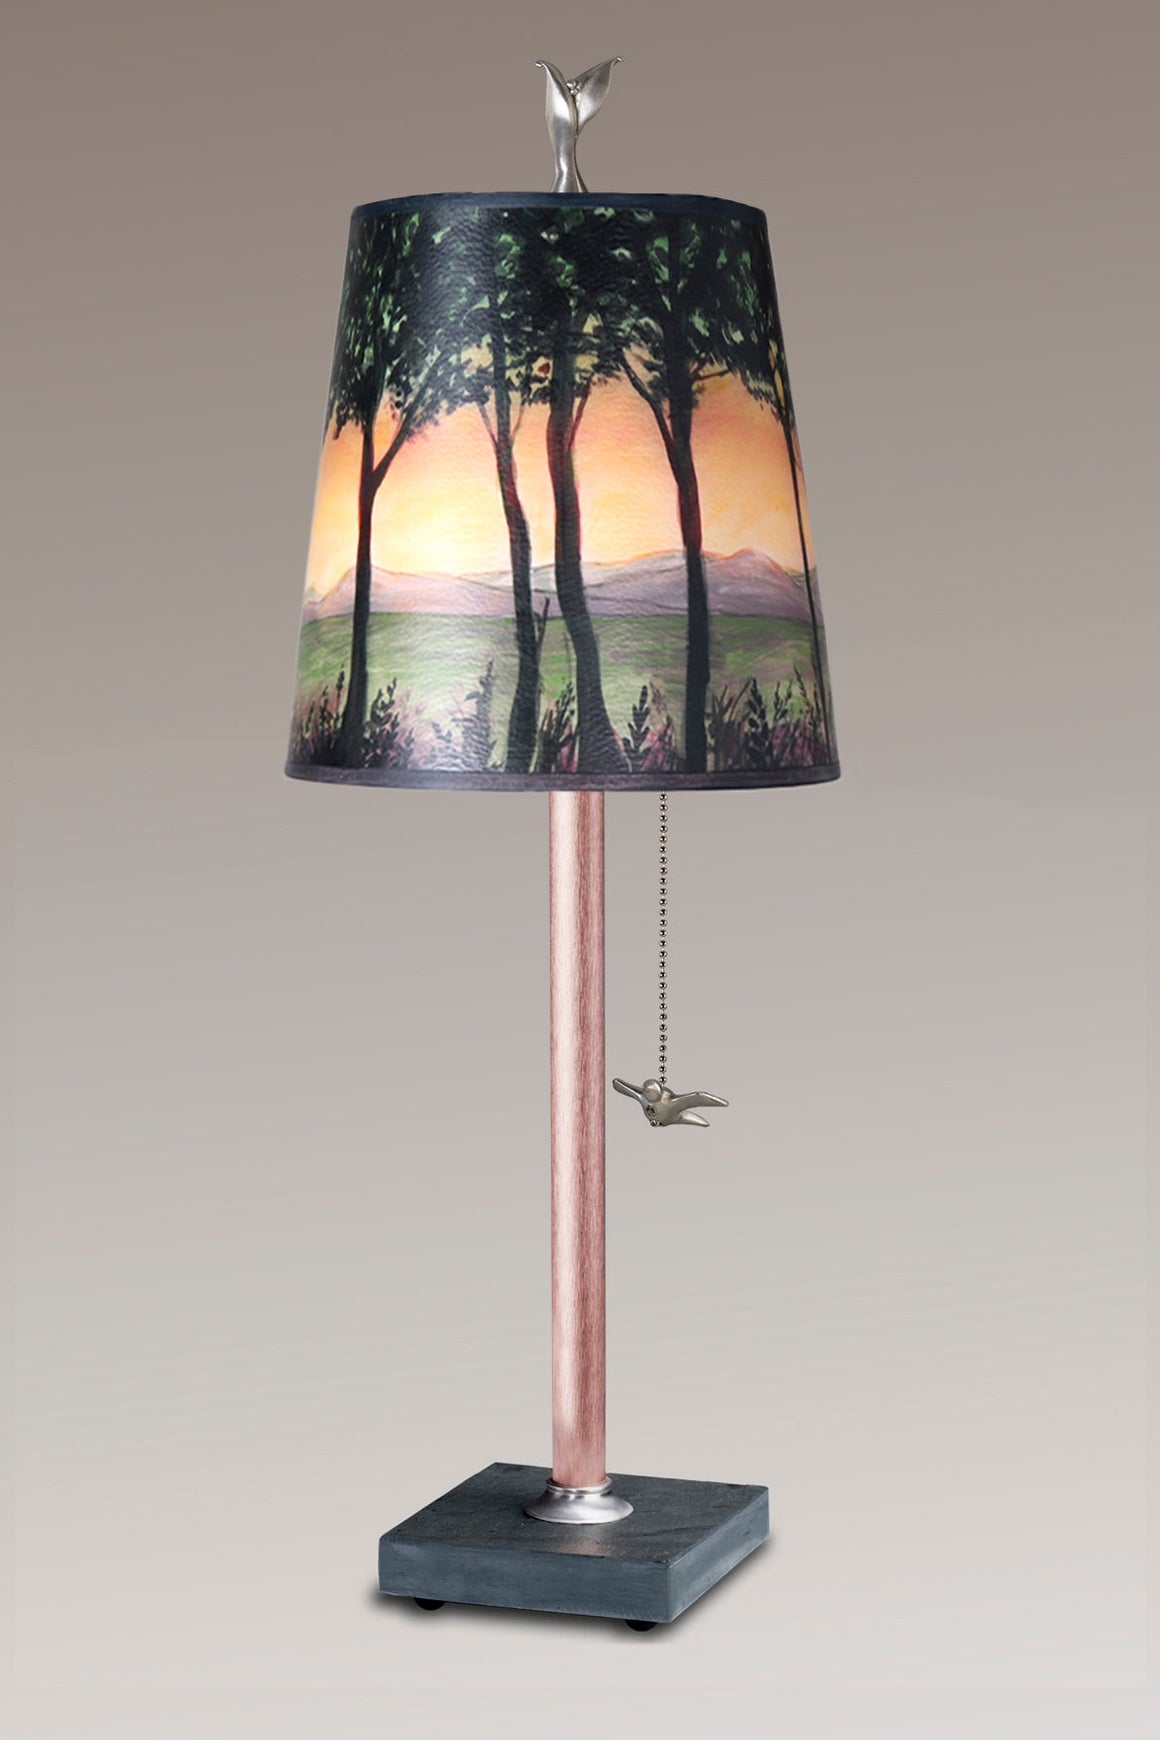 Copper Table Lamp with Small Drum Shade in Dawn